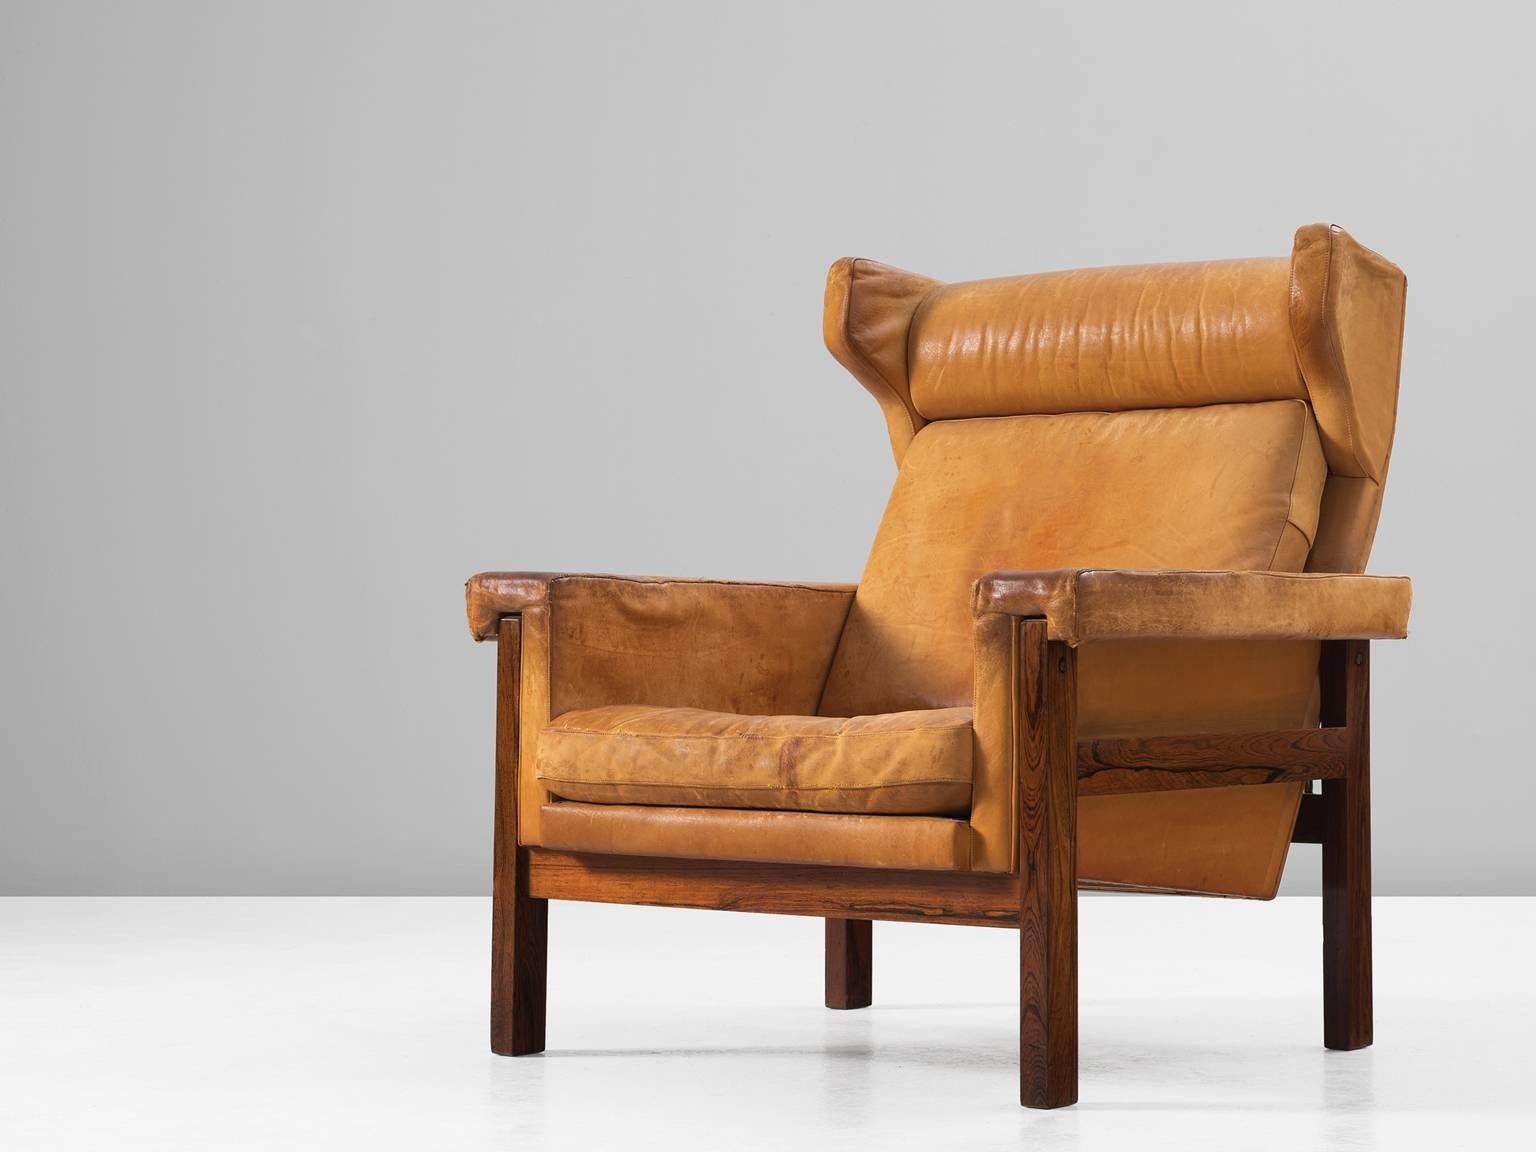 Wingback chair, in rosewood and leather, Denmark, 1960s.

Interesting wingback chair with solid rosewood frame and cognac leather upholstery. This chair shows interesting lines. It shows the classical elements of a lounge chair by Frits Henningsen